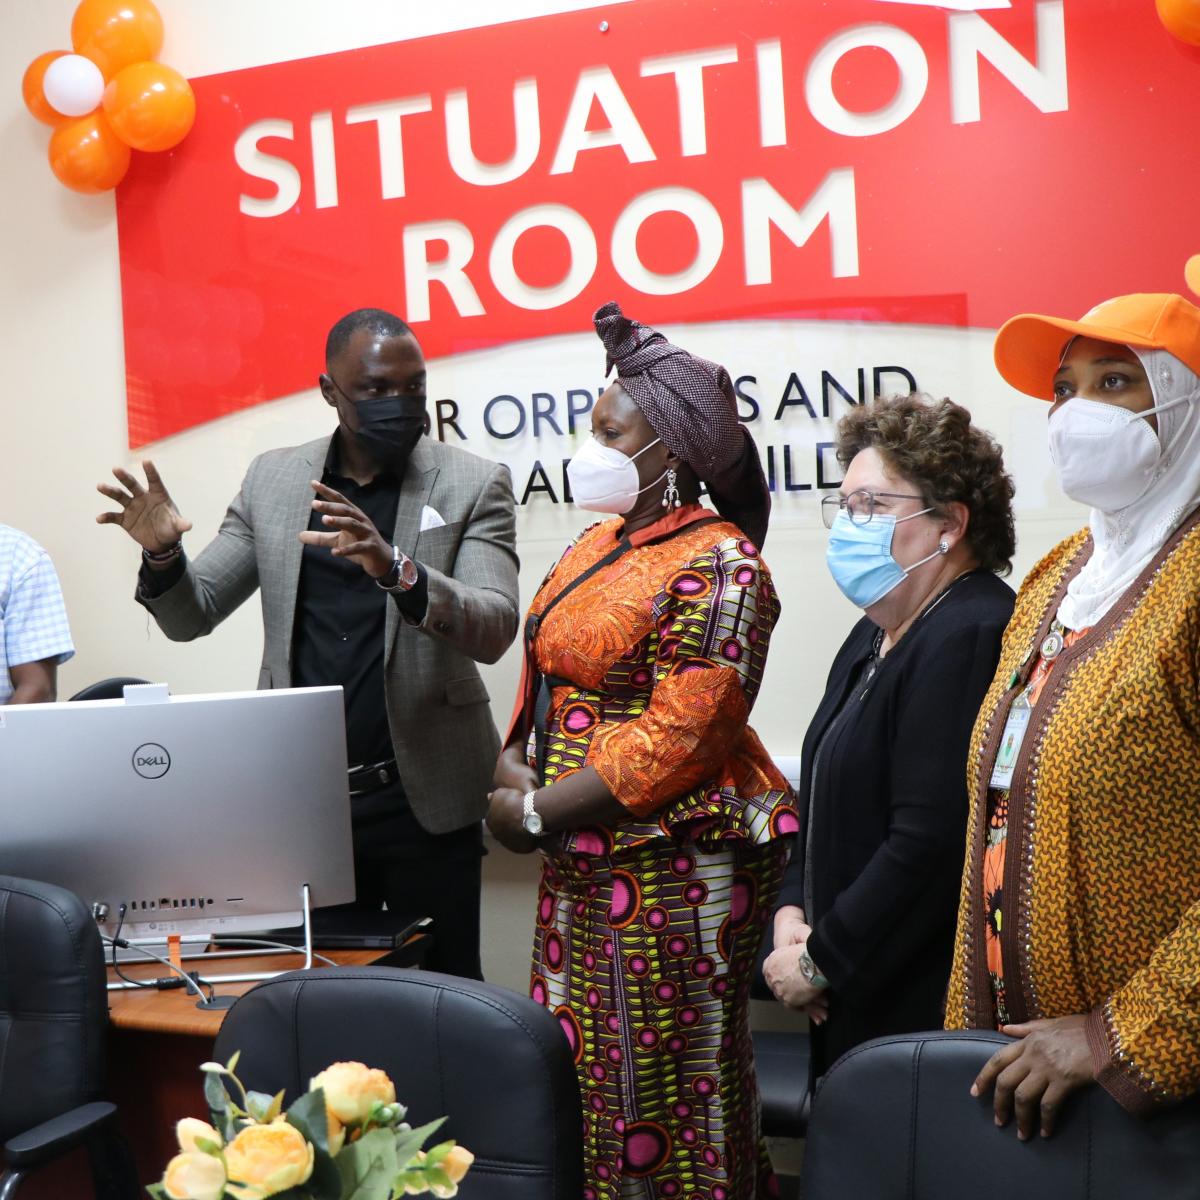 USAID, Ministry of Women Affairs Commission ‘Situation Room’ To Support Orphans and Vulnerable Children